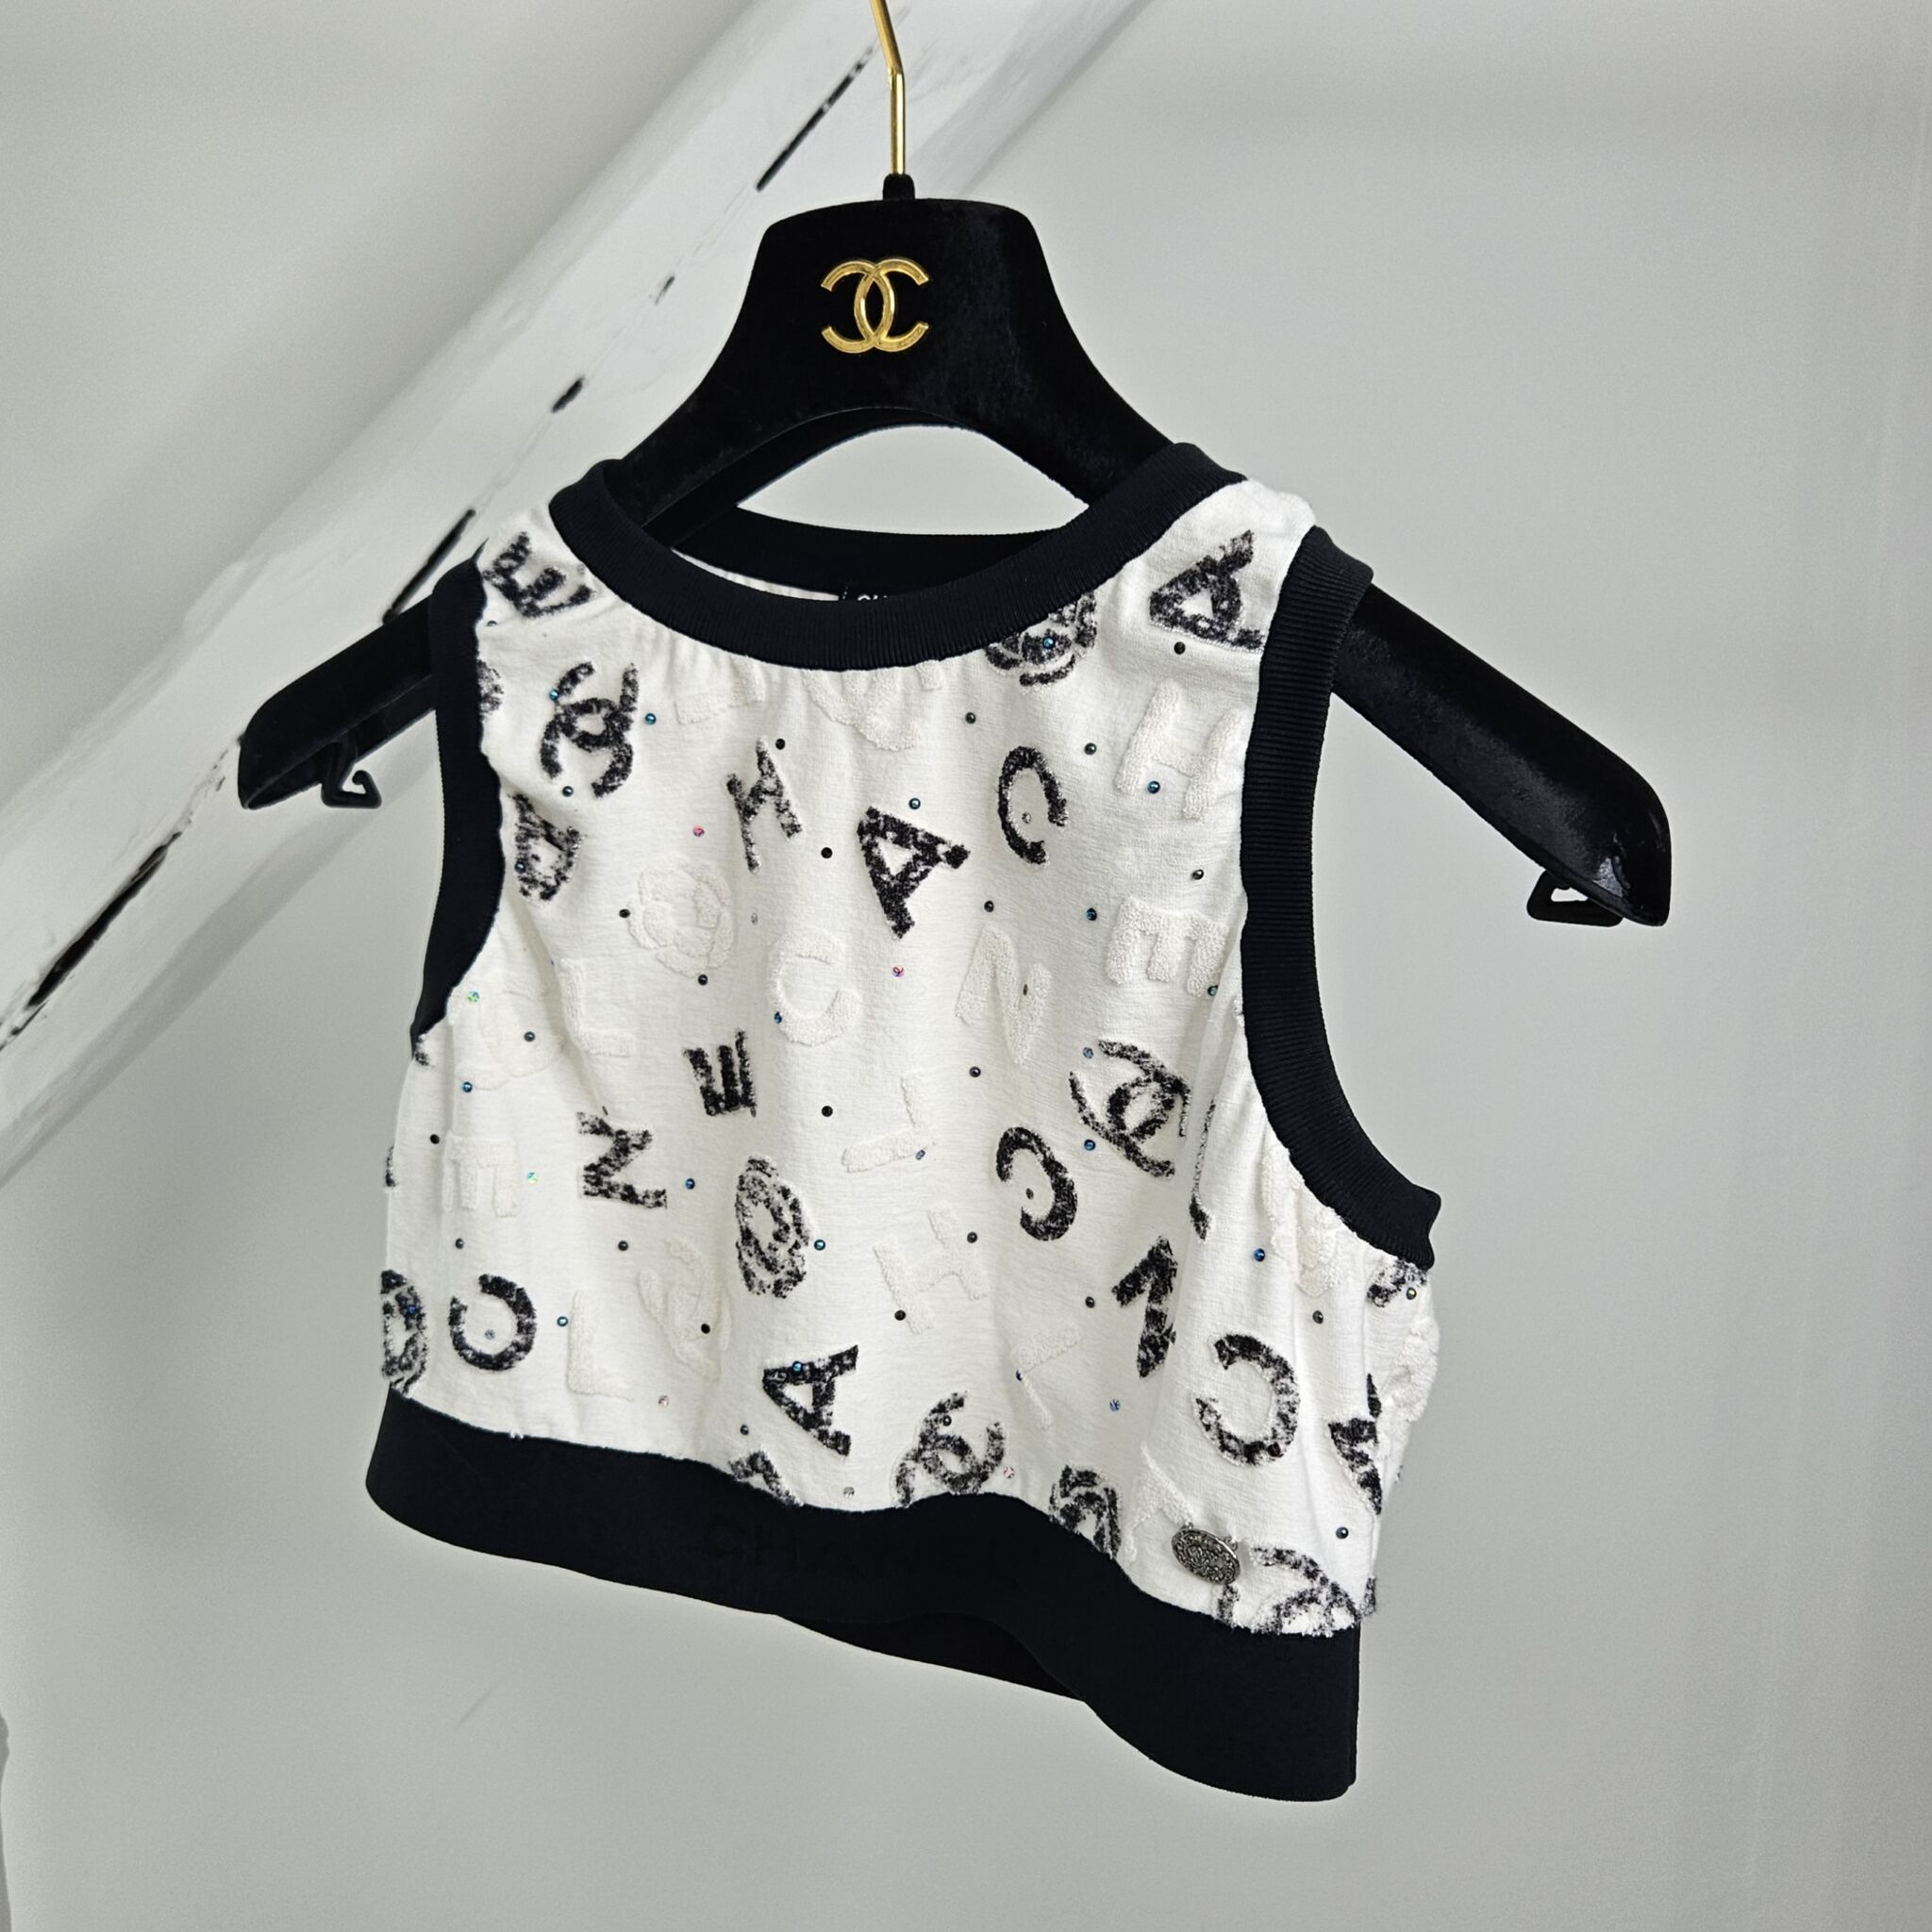 Chanel Crop Top, White/Black, Small - Laulay Luxury